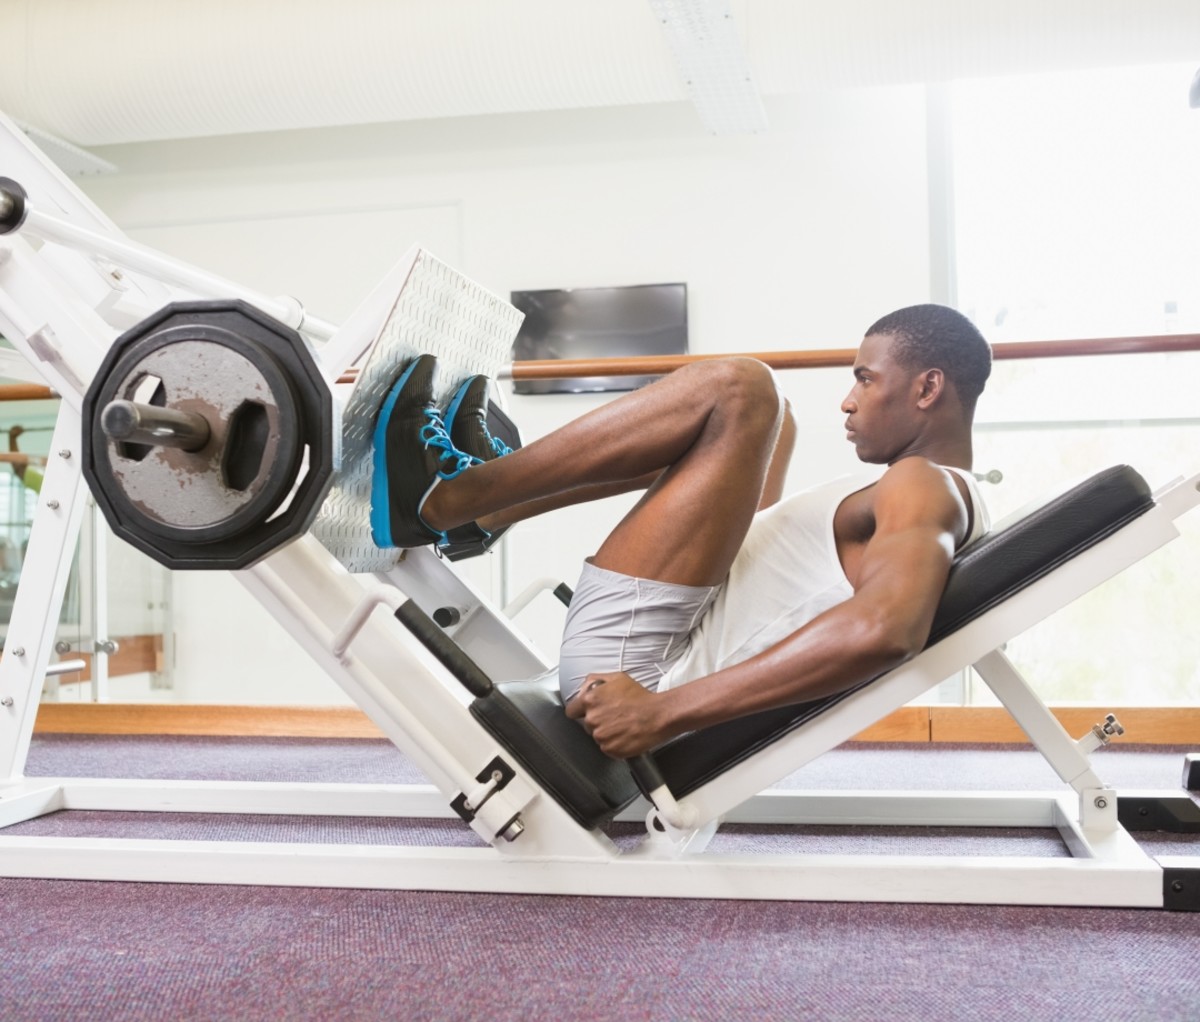 Why do people need fitness exercise equipment?